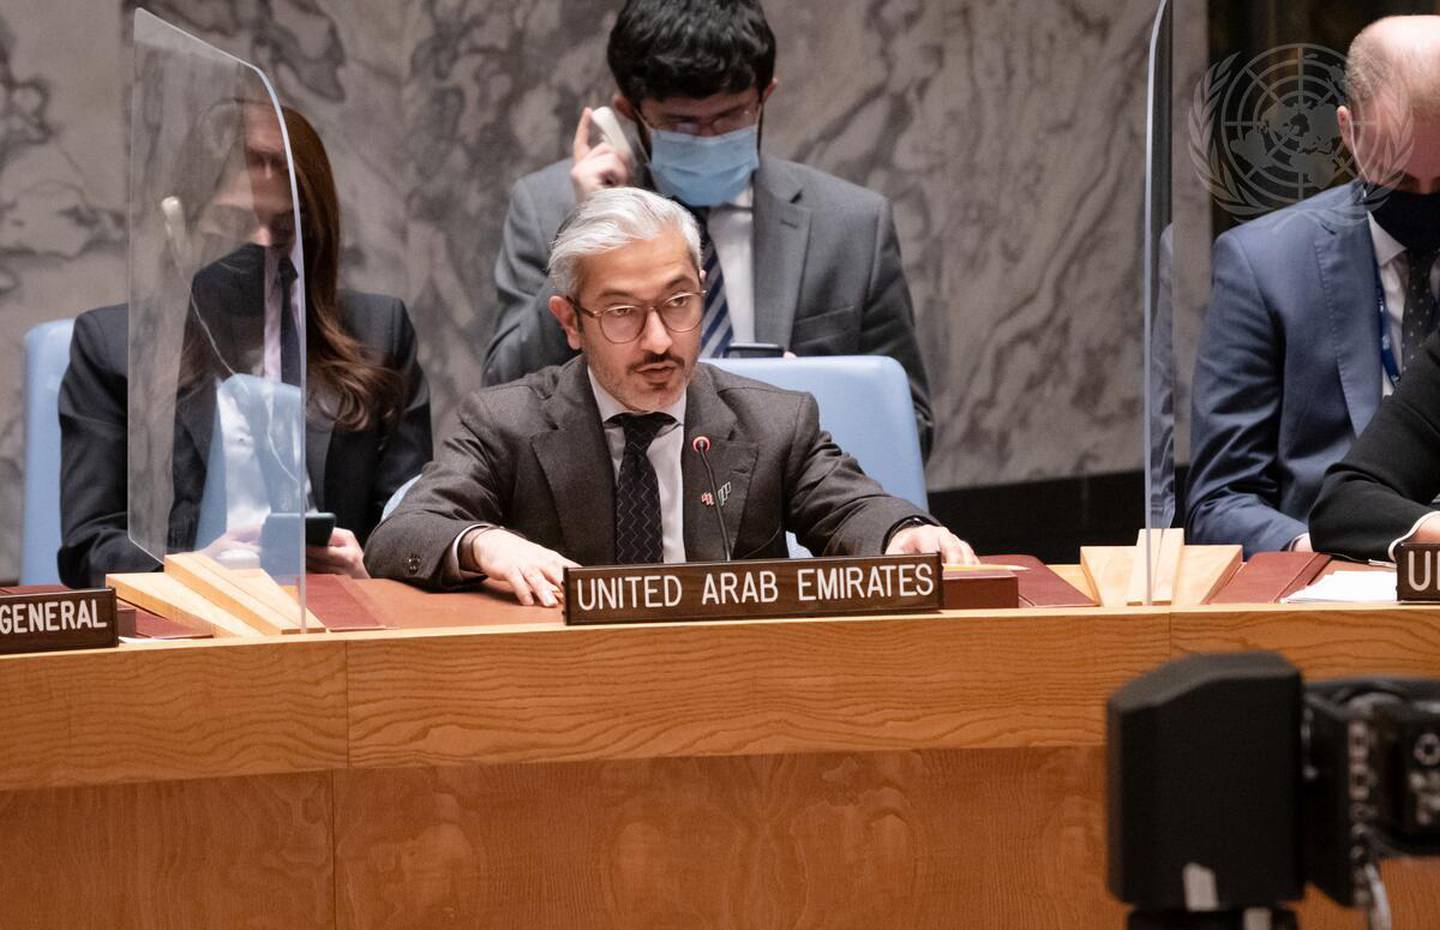 The UAE's Deputy Permanent Representative to the UN, Mohamed Abushahab, said terrorist groups have been using Islam to justify their campaigns of violence.  Image: United Nations